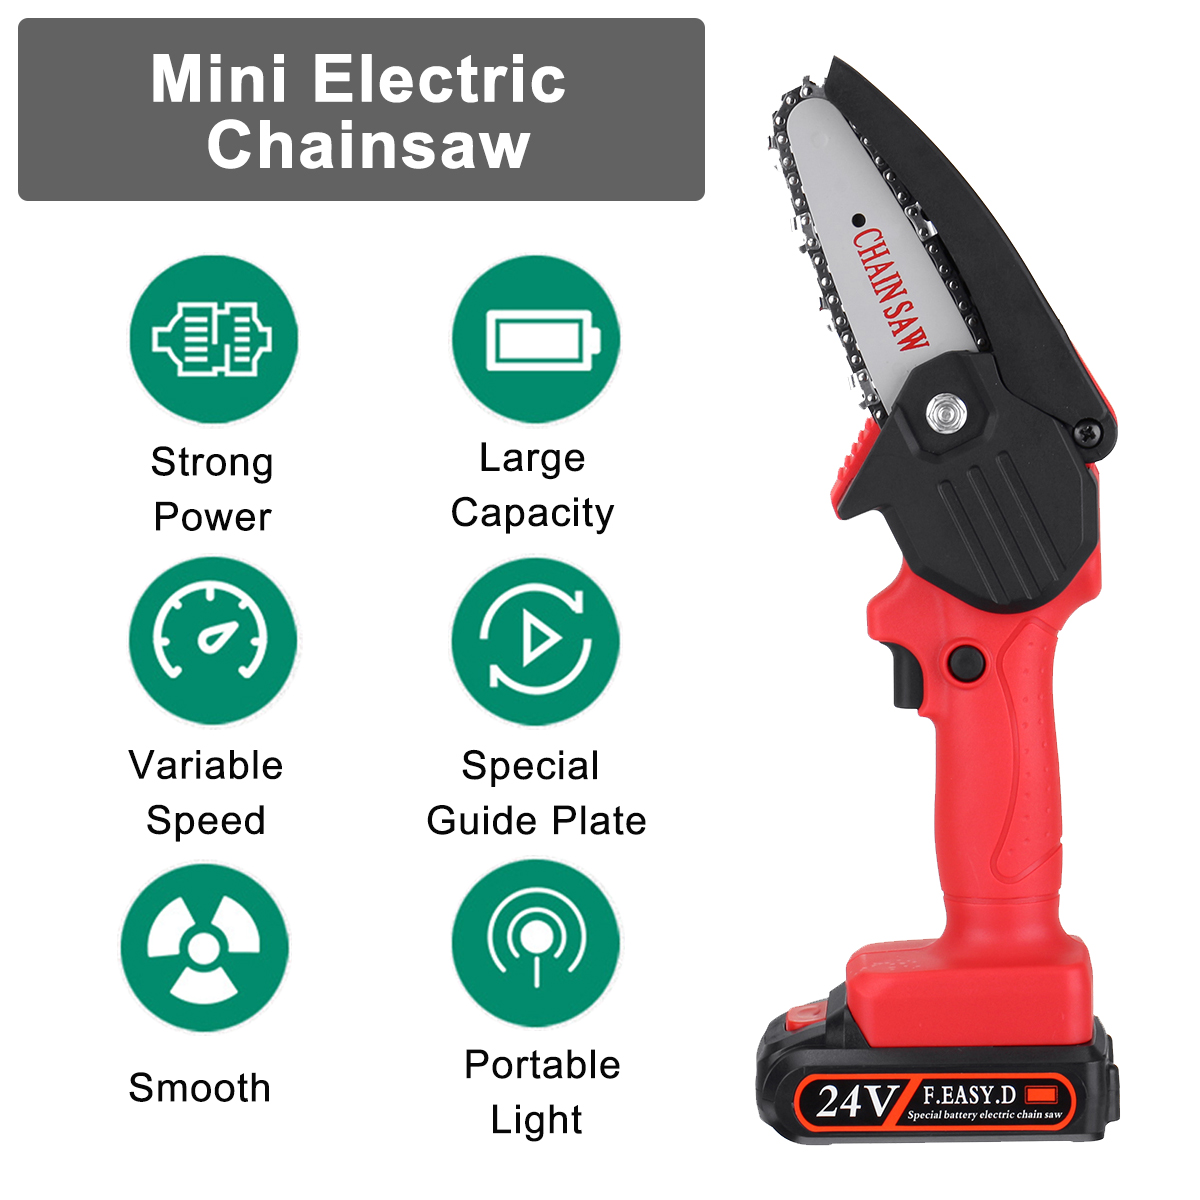 24V-650W-Portable-Wood-Pruning-Saw-4-Inch-Rechargable-Mini-Electric-Chainsaw-Handheld-Wood-Pruning-S-1823668-2